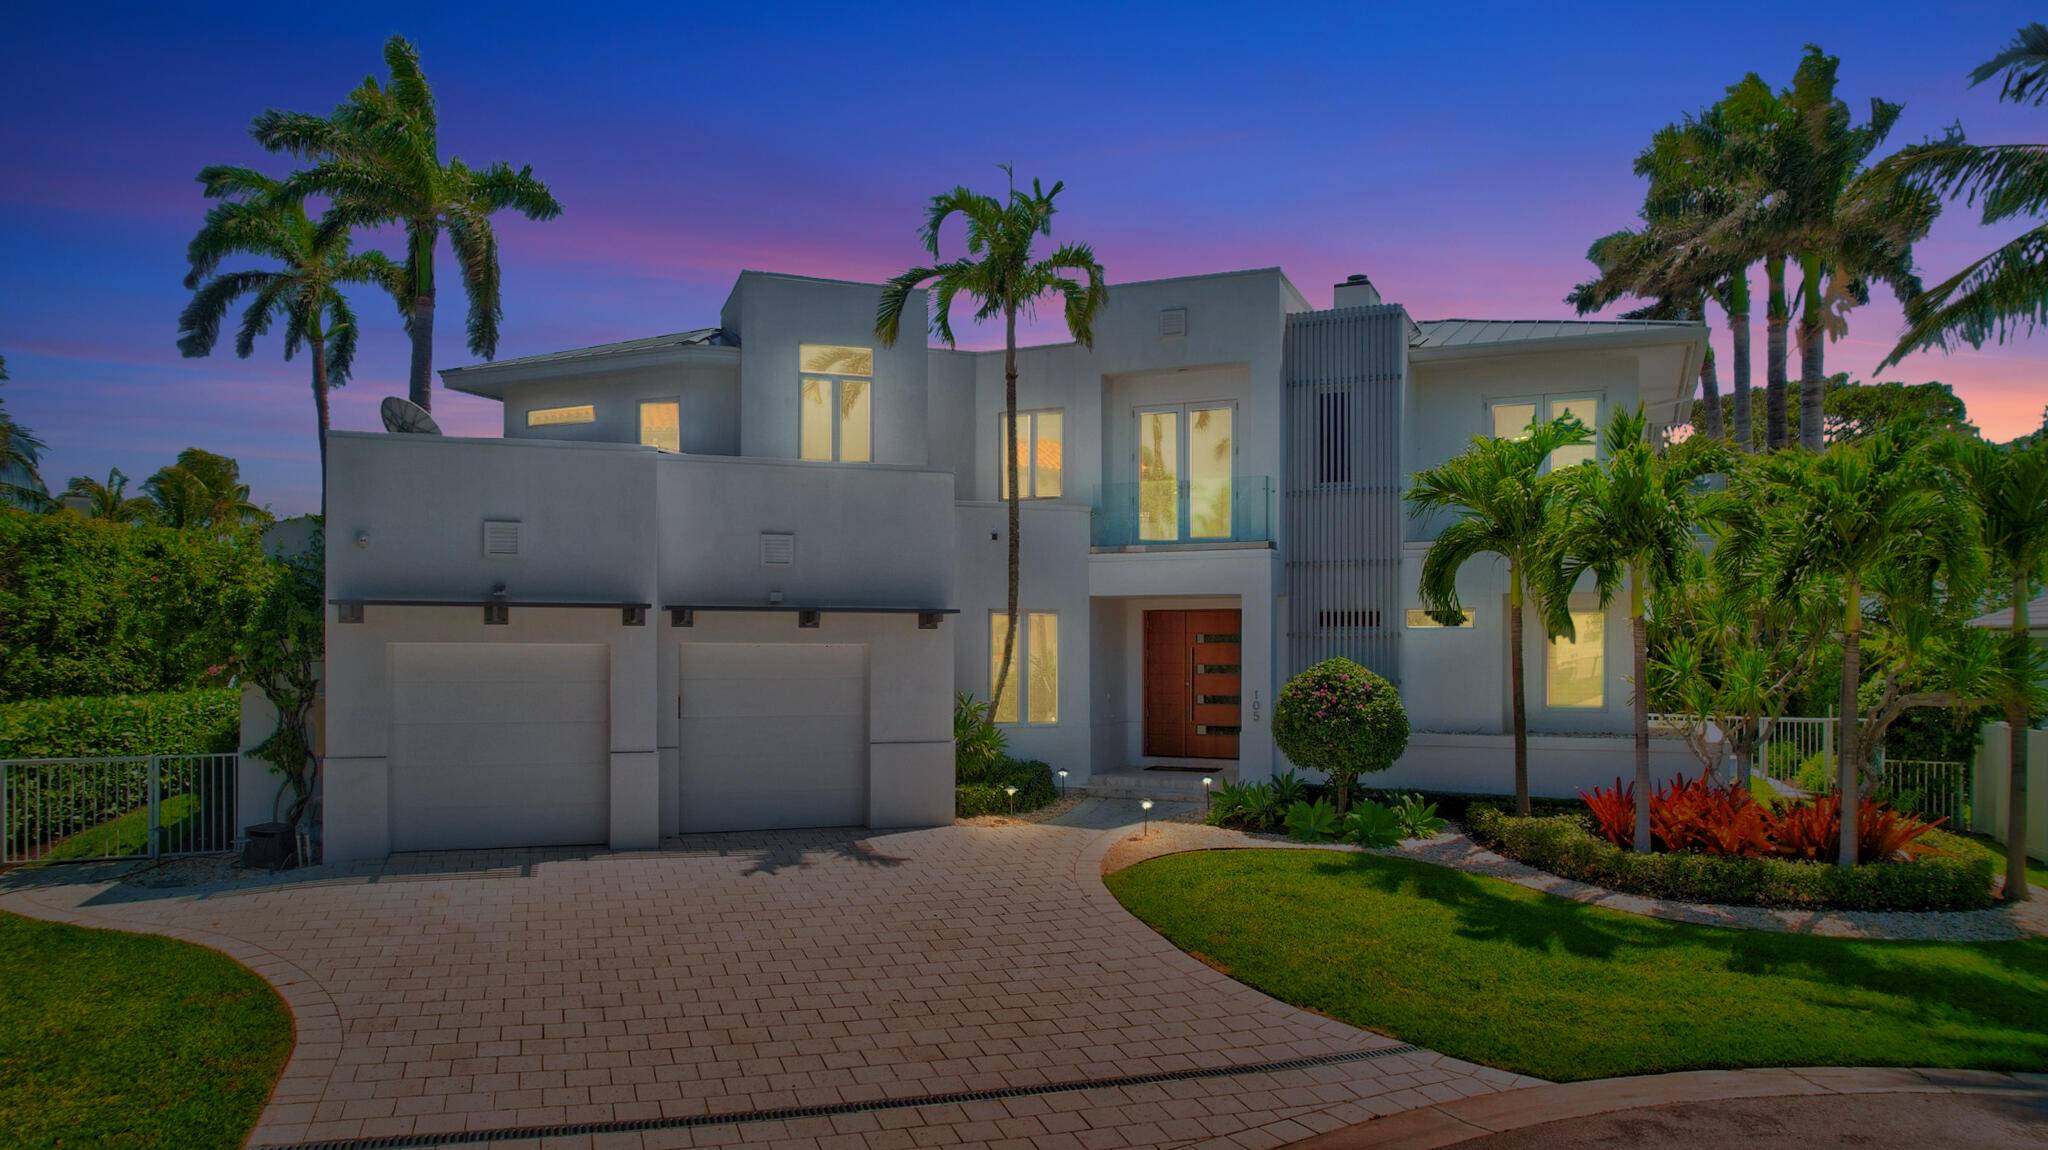 WELCOME TO THIS MAGNIFICENT CONTEMPORARY STYLED HOME WHICH OFFERS SPECTACULAR INTRACOASTAL VIEWS, DESIRABLE SOUTHERN EXPOSURE, AND IS LOCATED JUST ONE LOT OFF THE INTRACOASTAL.